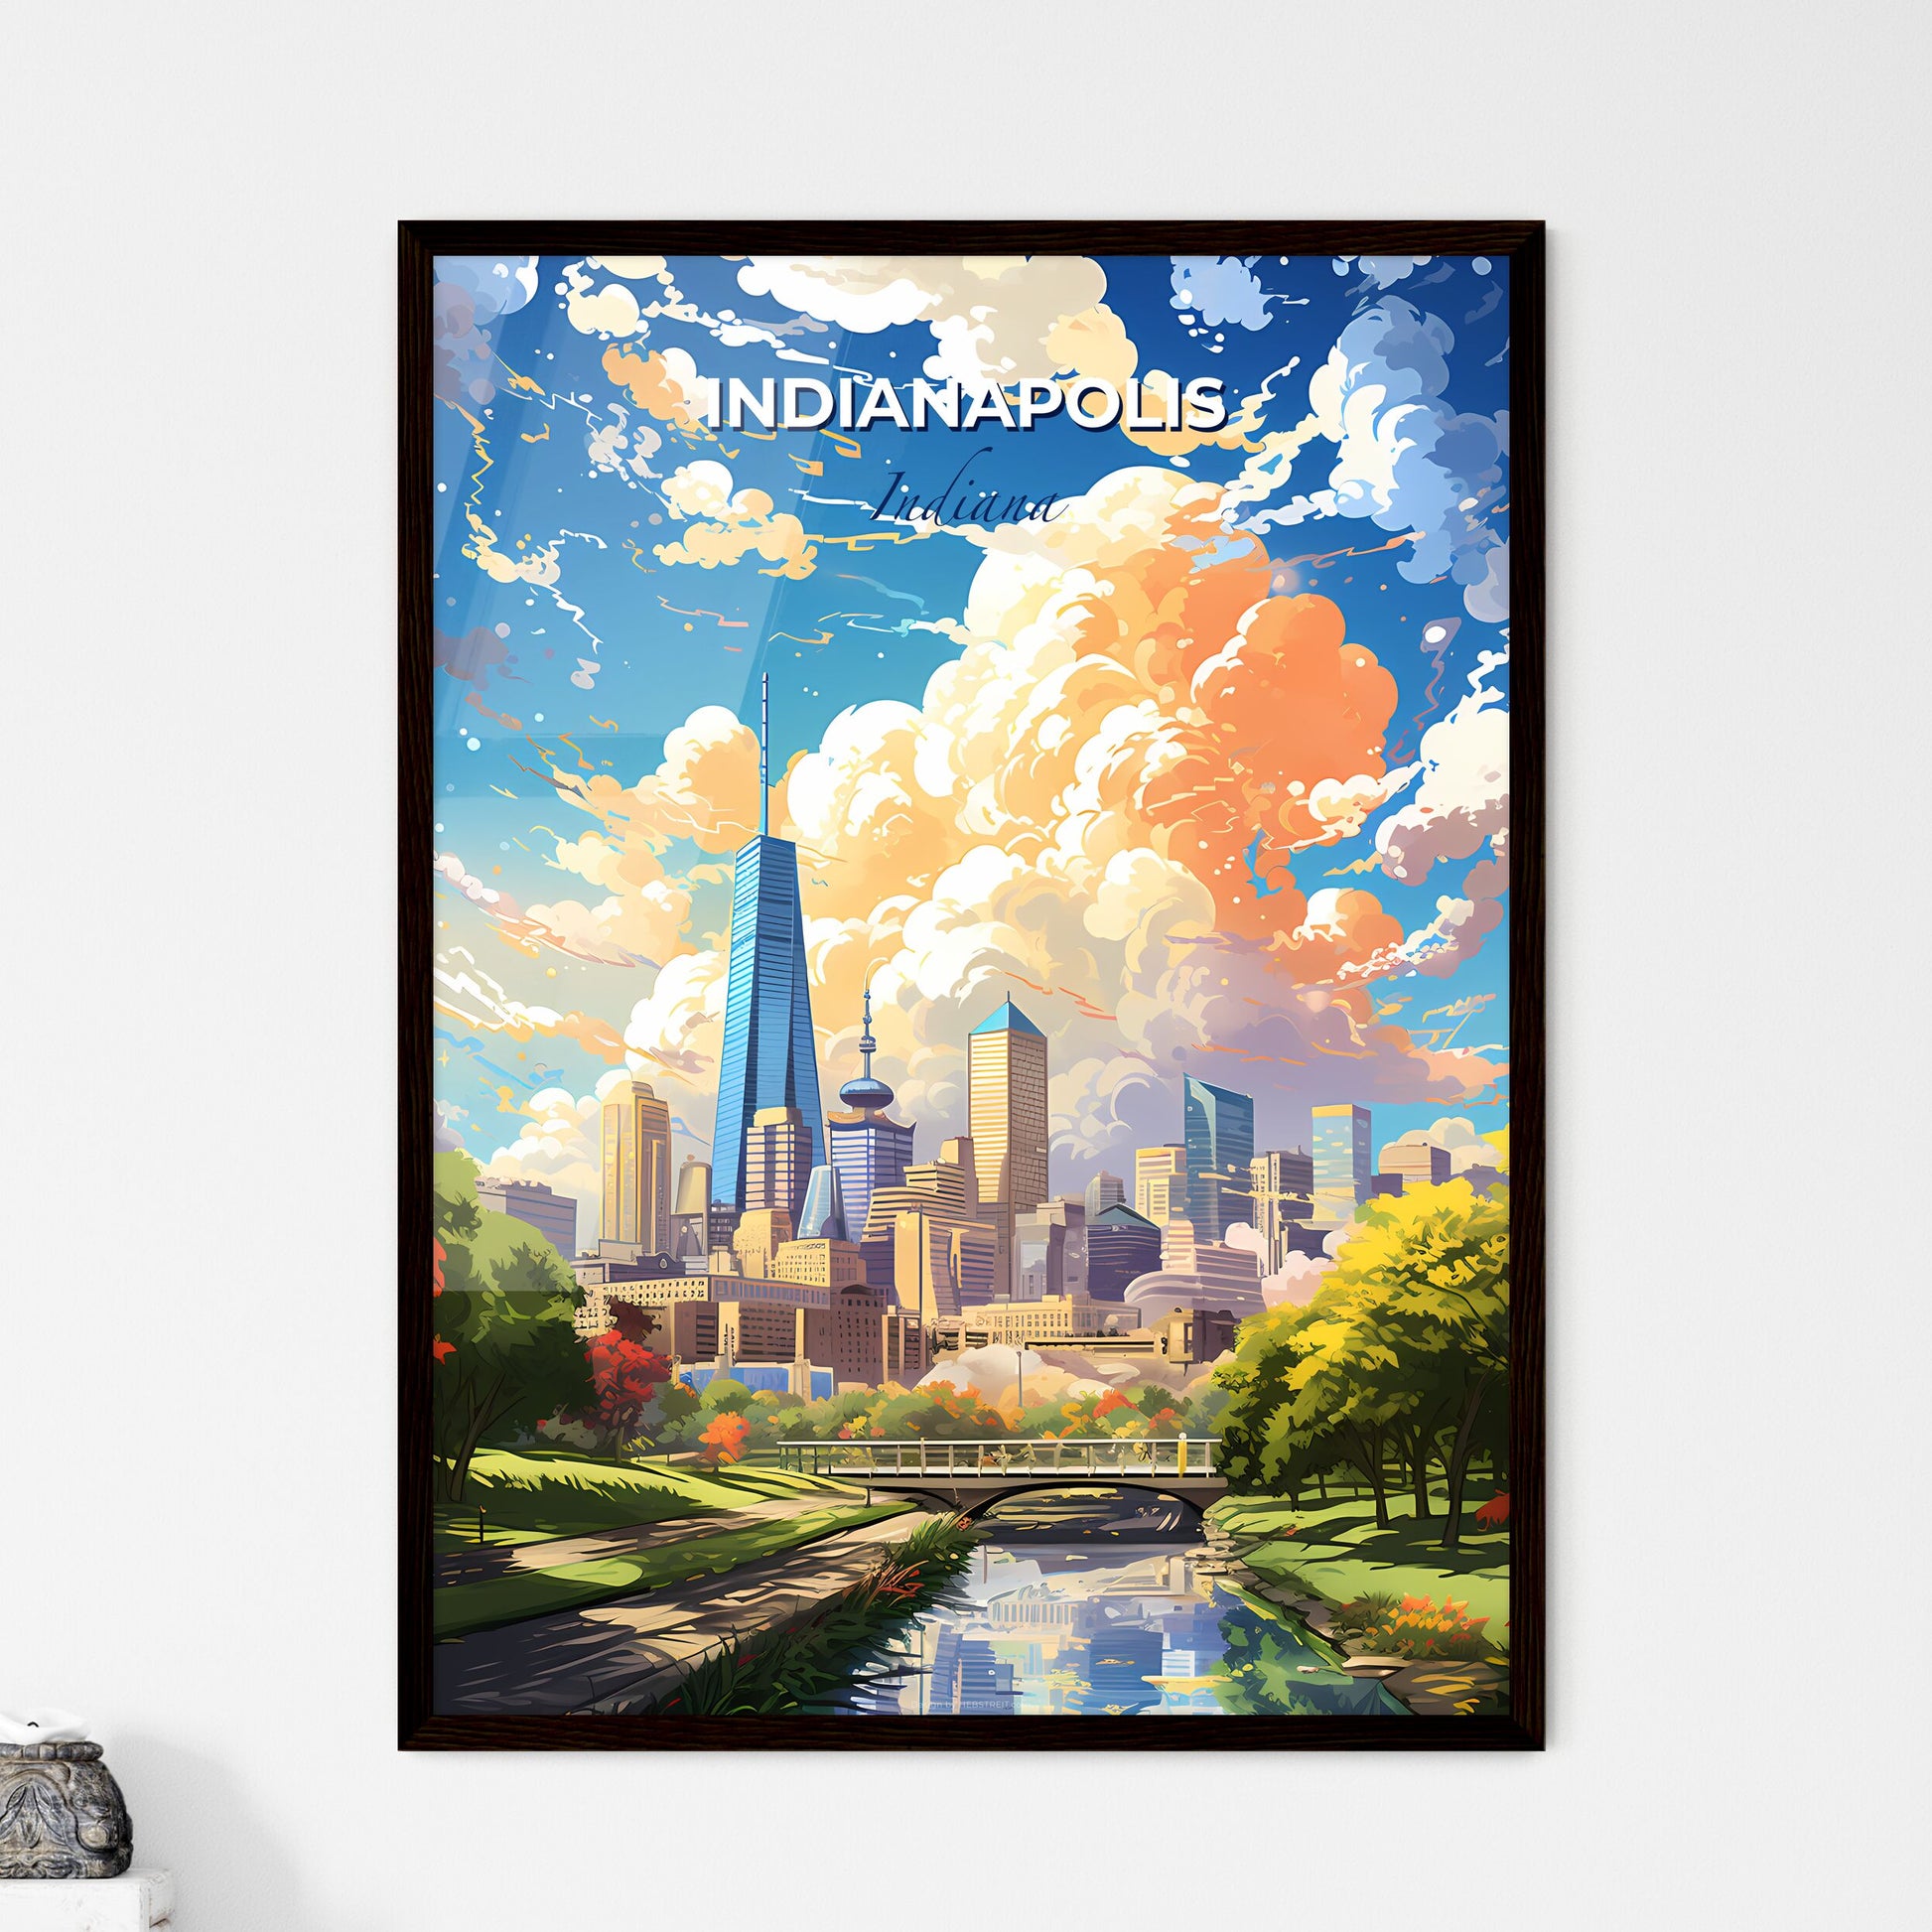 Indianapolis Indiana Skyline - A City Landscape With A Bridge And Trees - Customizable Travel Gift Default Title